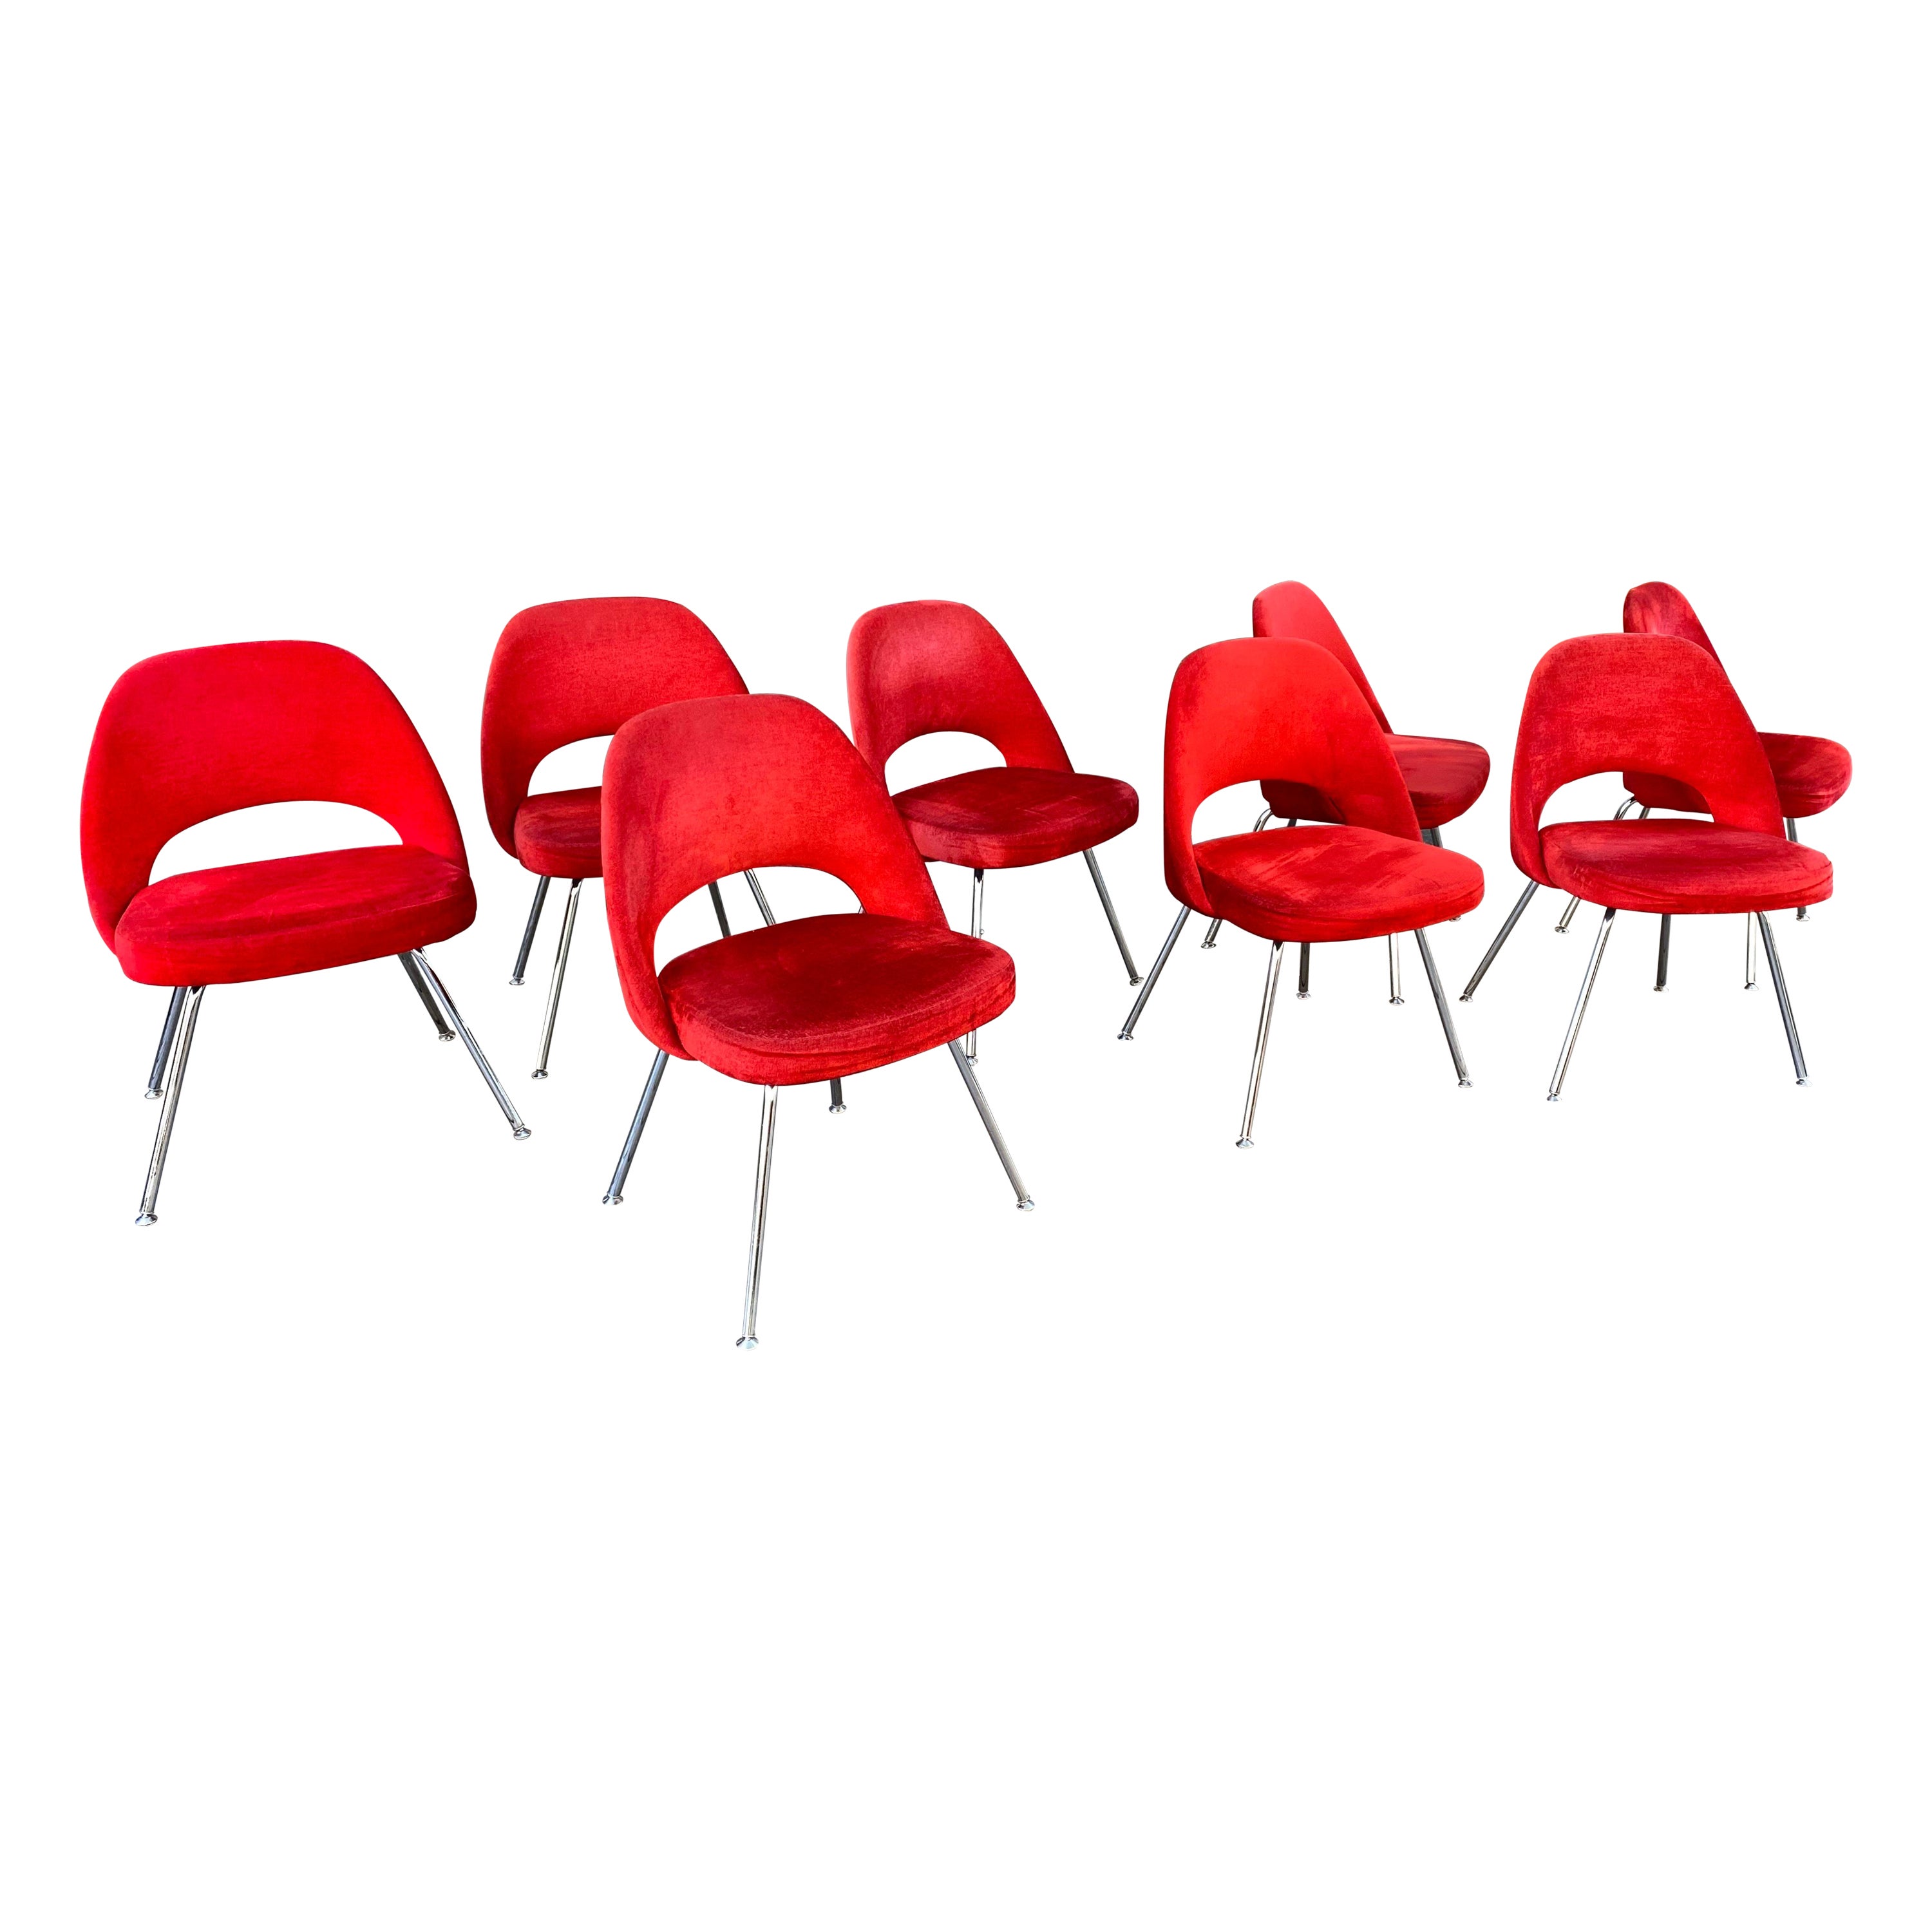 Saarinen for Knoll Executive Side/ Dining Chairs (chaises de salle à manger)